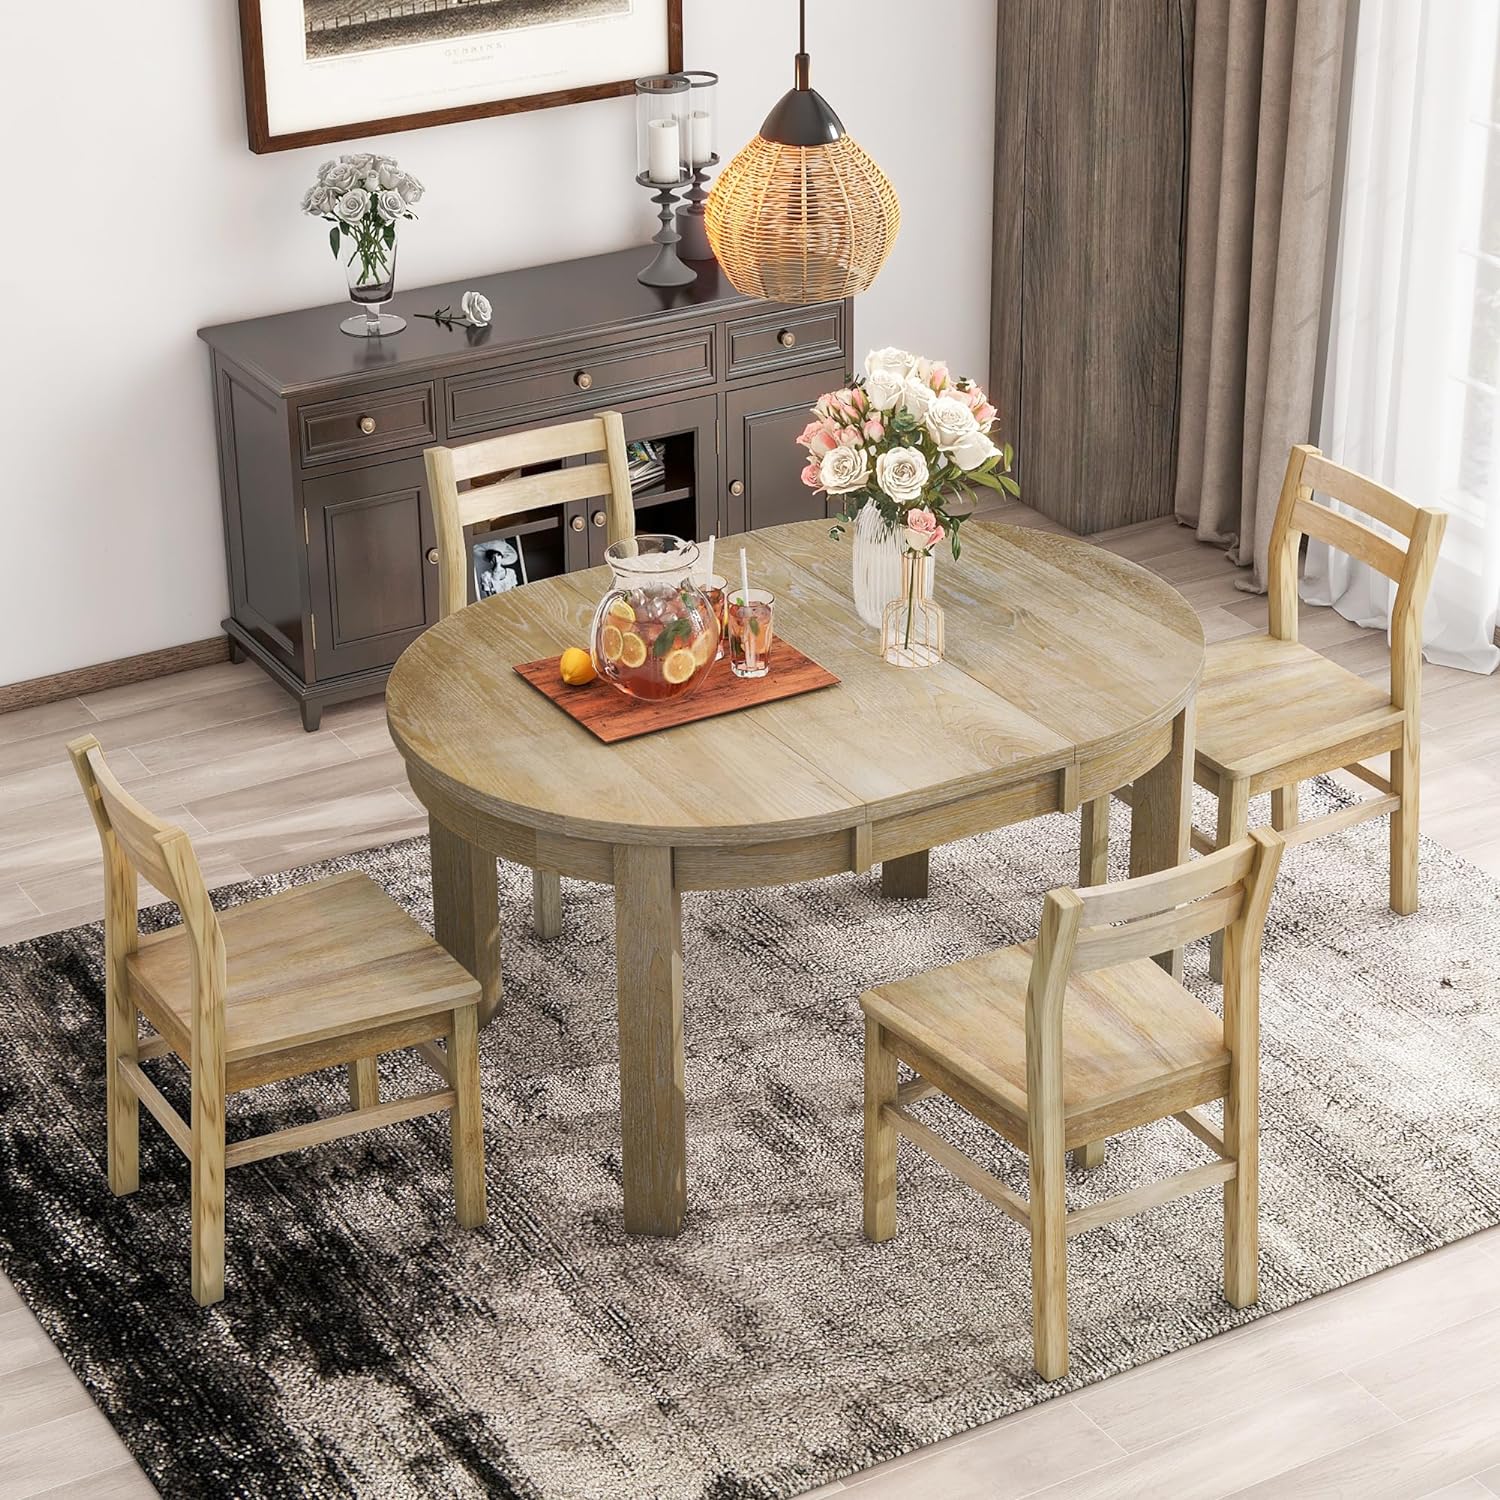 WILLIAMSPACE 5-Piece Extendable Round Dining Table Set, Farmhouse Wood Dining Table with Storage Drawers and 4 Dining Chairs, 16 Removable Leaf, Kitchen Set for Dining Room (Natural)